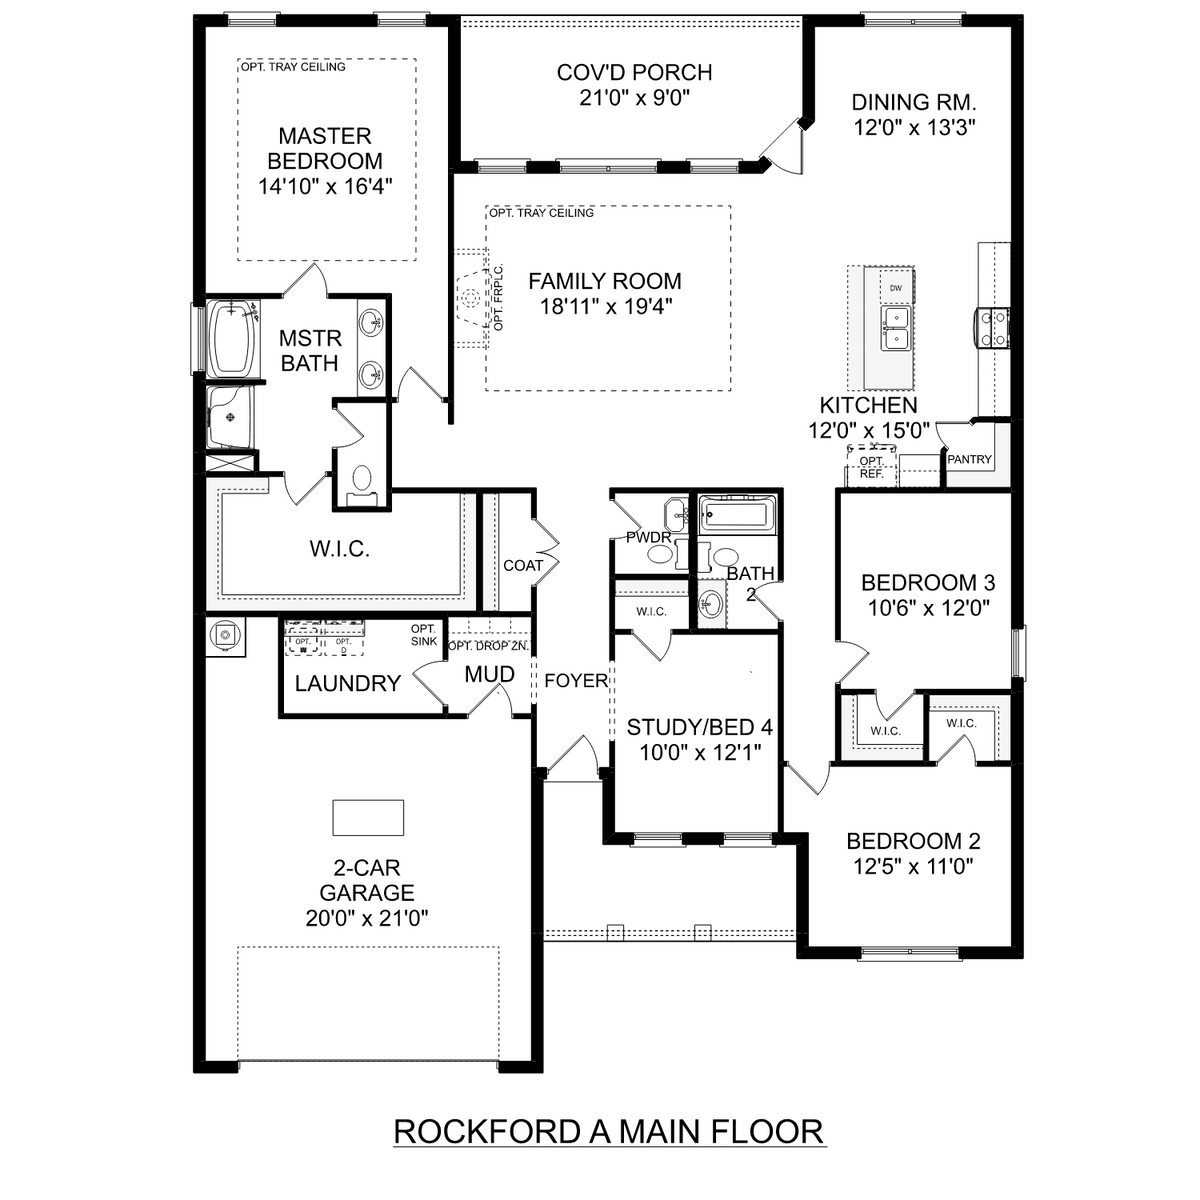 1 - The Rockford buildable floor plan layout in Davidson Homes' Creekside community.